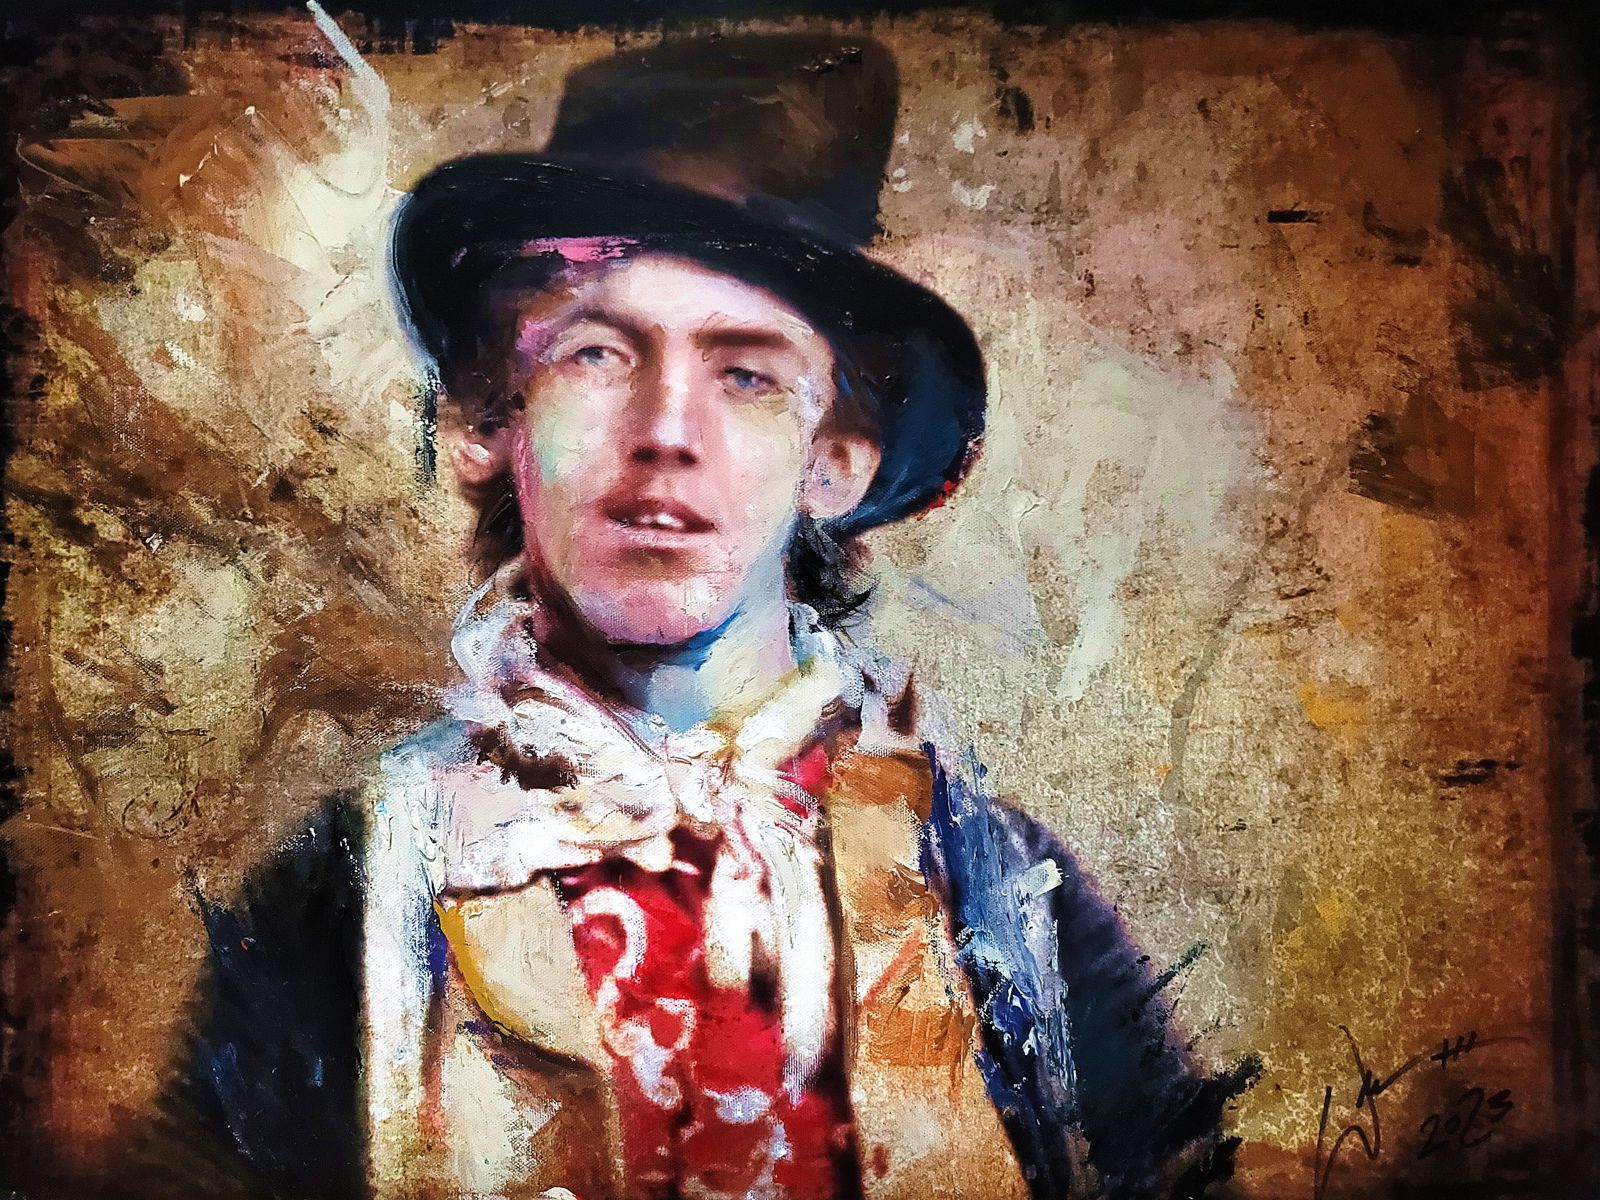 Billy the Kid painting by artist, William III